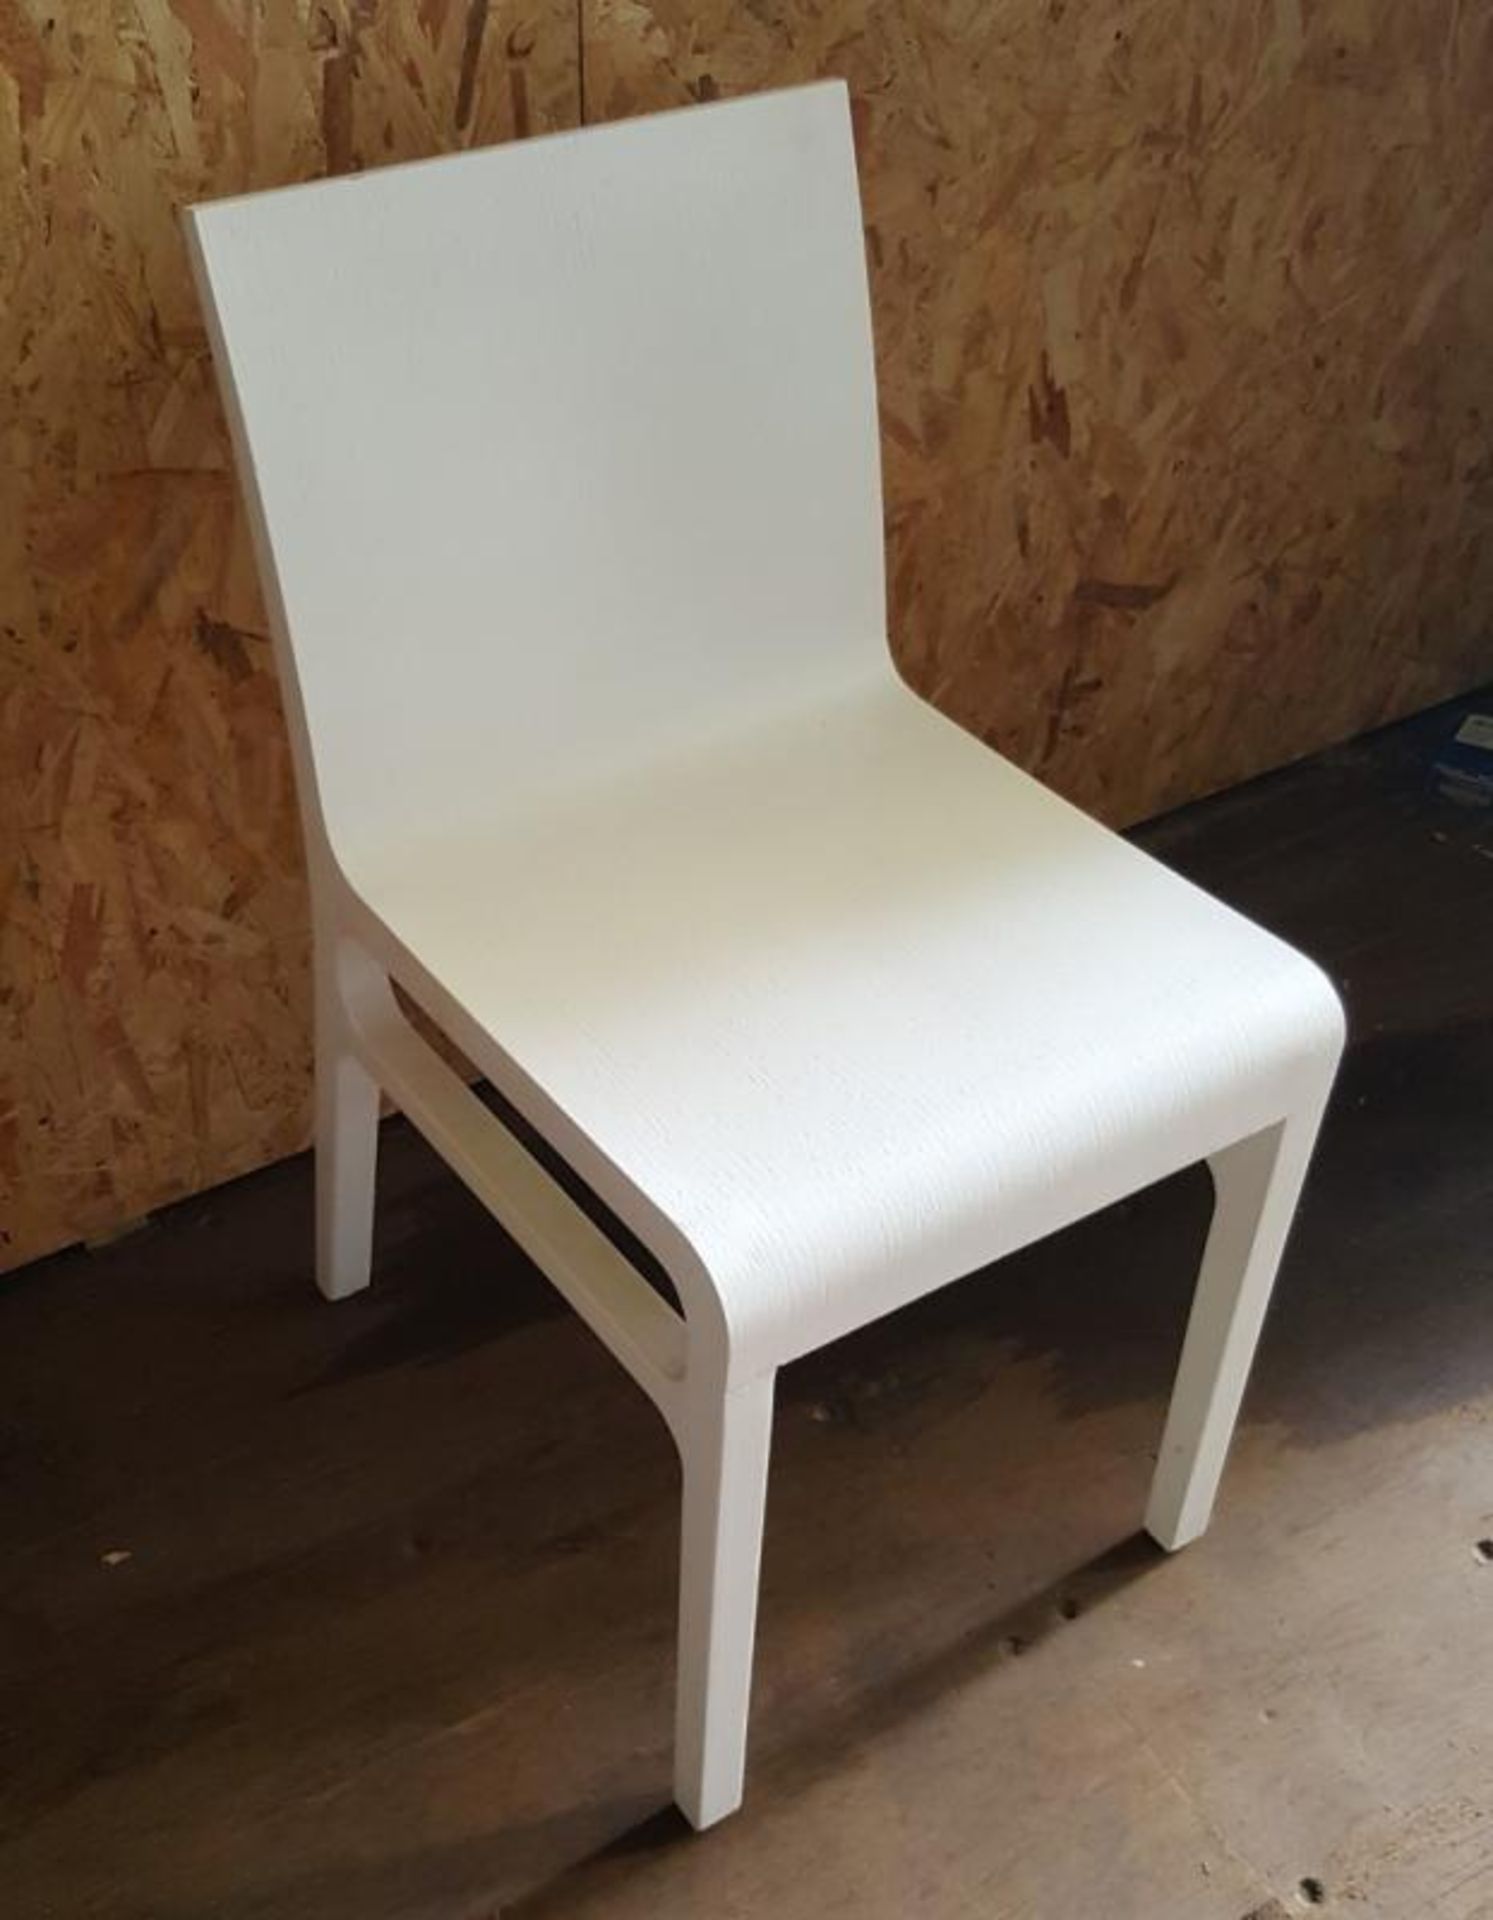 4 x Wooden Dining Chairs Set With A Bright White Finish - Dimensions: Used, In Good Condition - Ref - Image 5 of 6